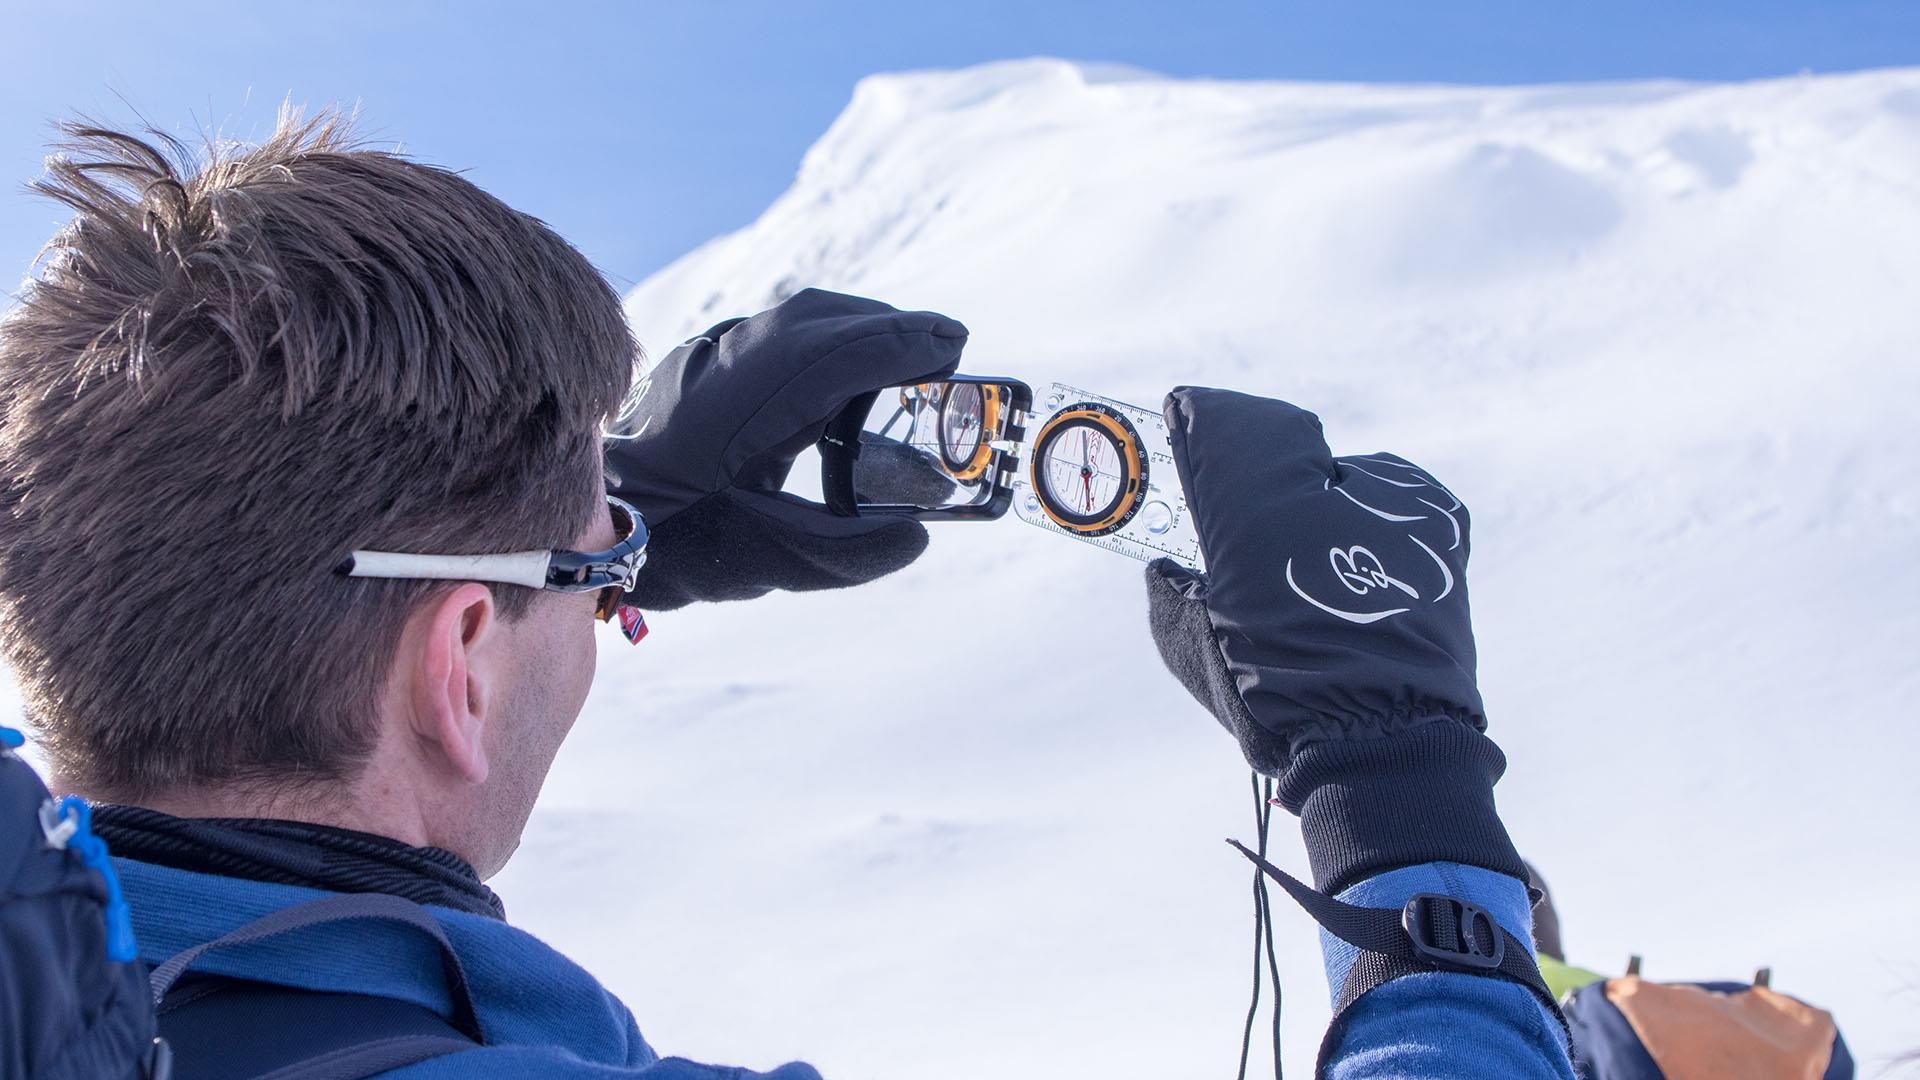 A person uses a compass to determine the inclination of a hillside in the winter mountains.